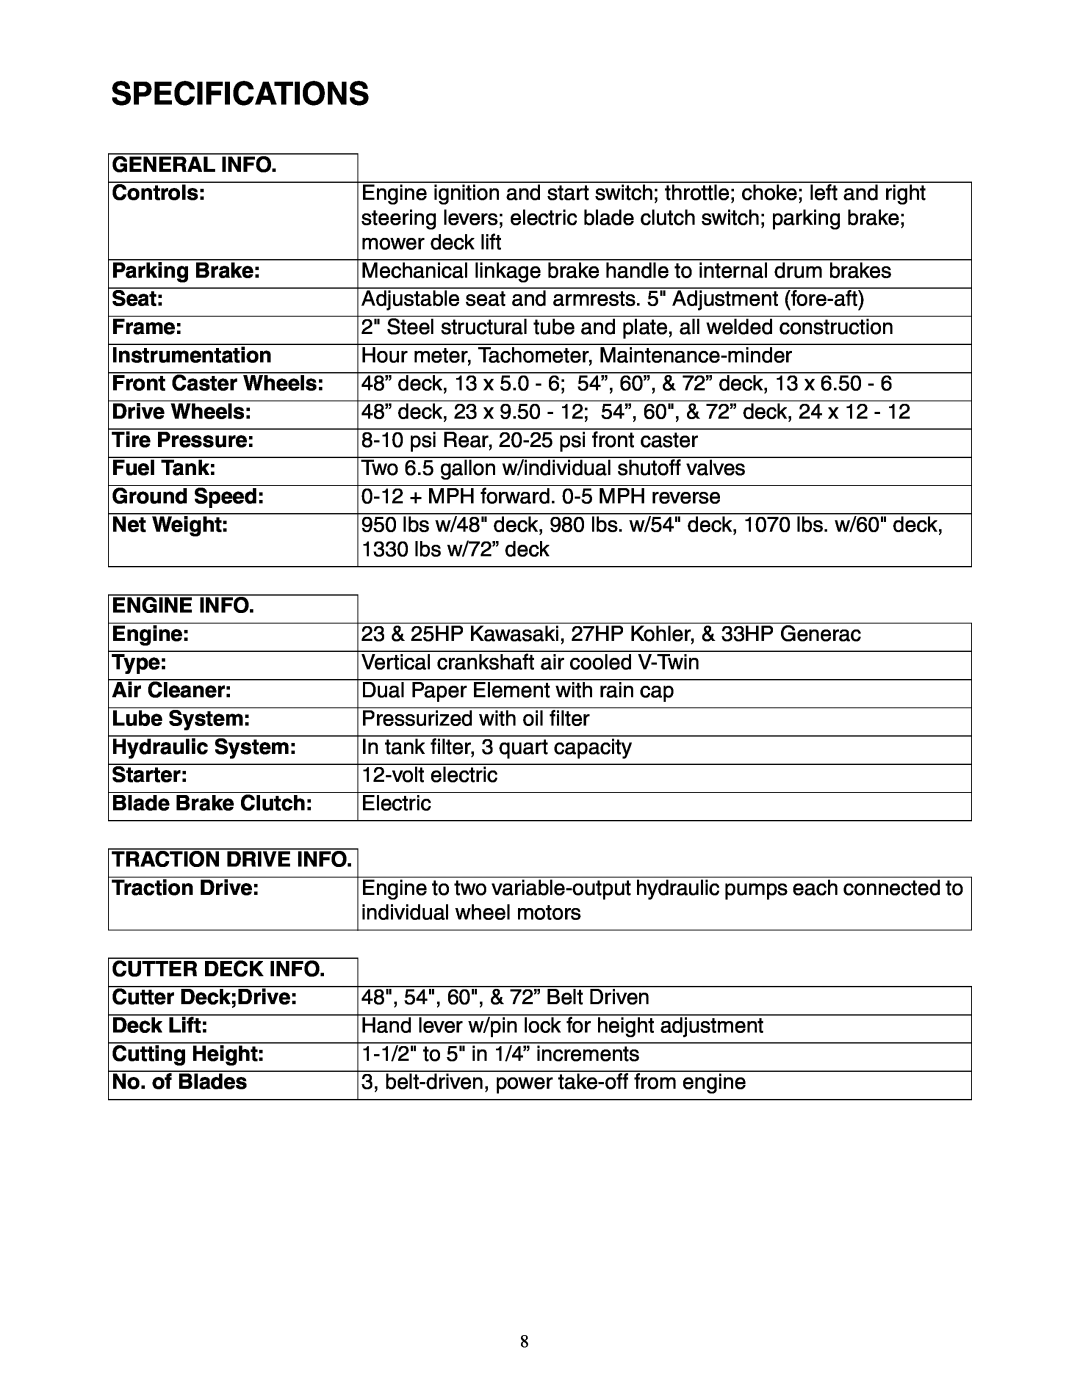 Cub Cadet 48-inch, 54-inch, 60-inch, 72-inch service manual Specifications 